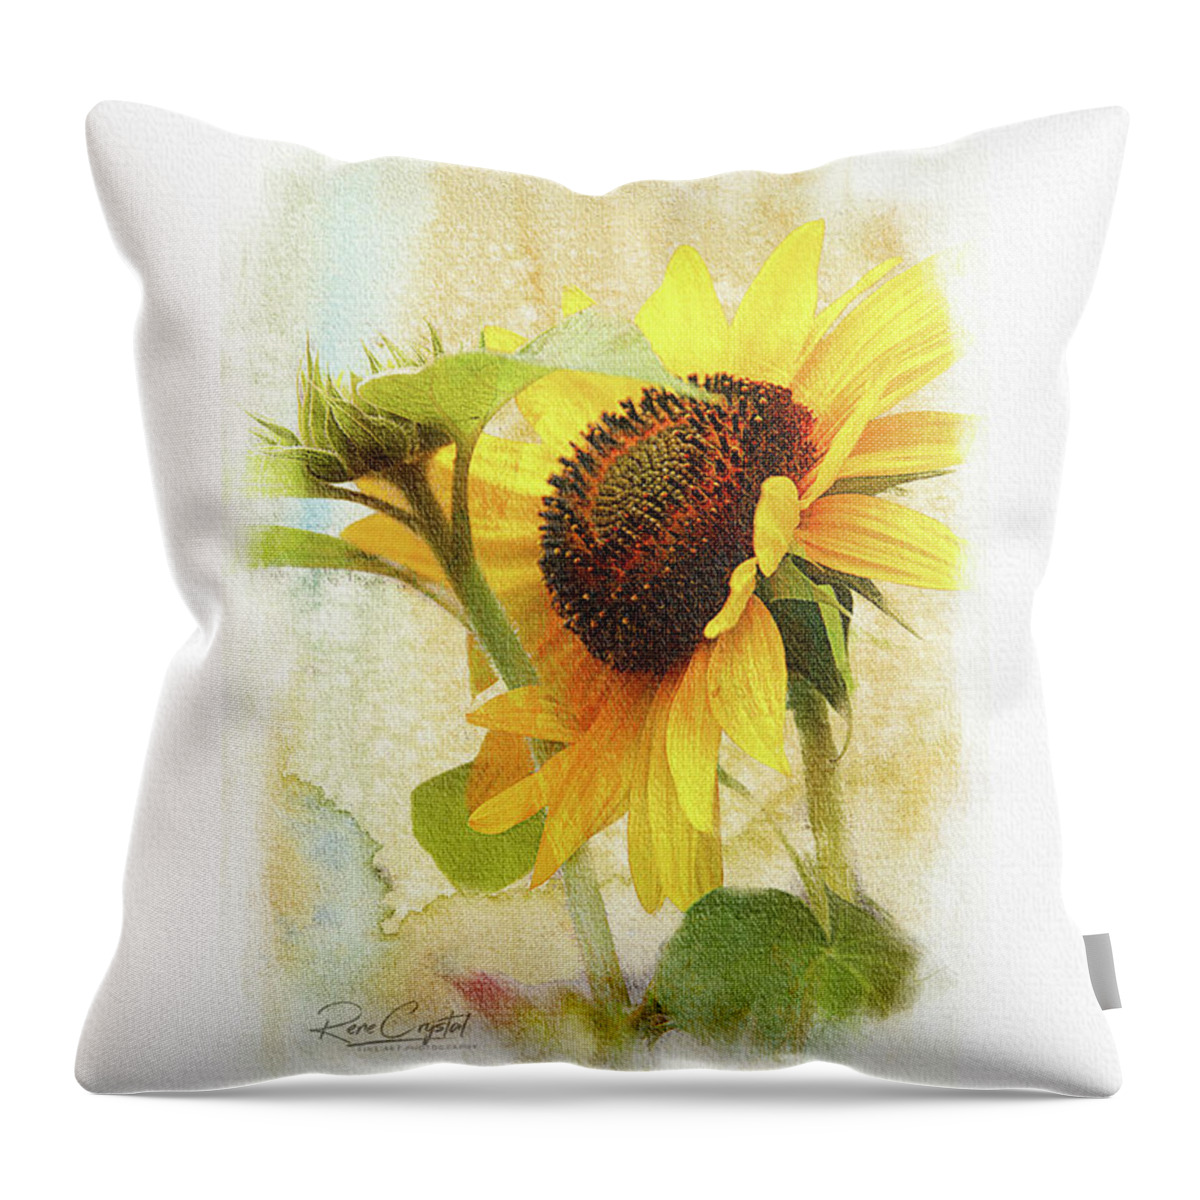 Sunflowers Throw Pillow featuring the photograph Sunflower Sunshine by Rene Crystal